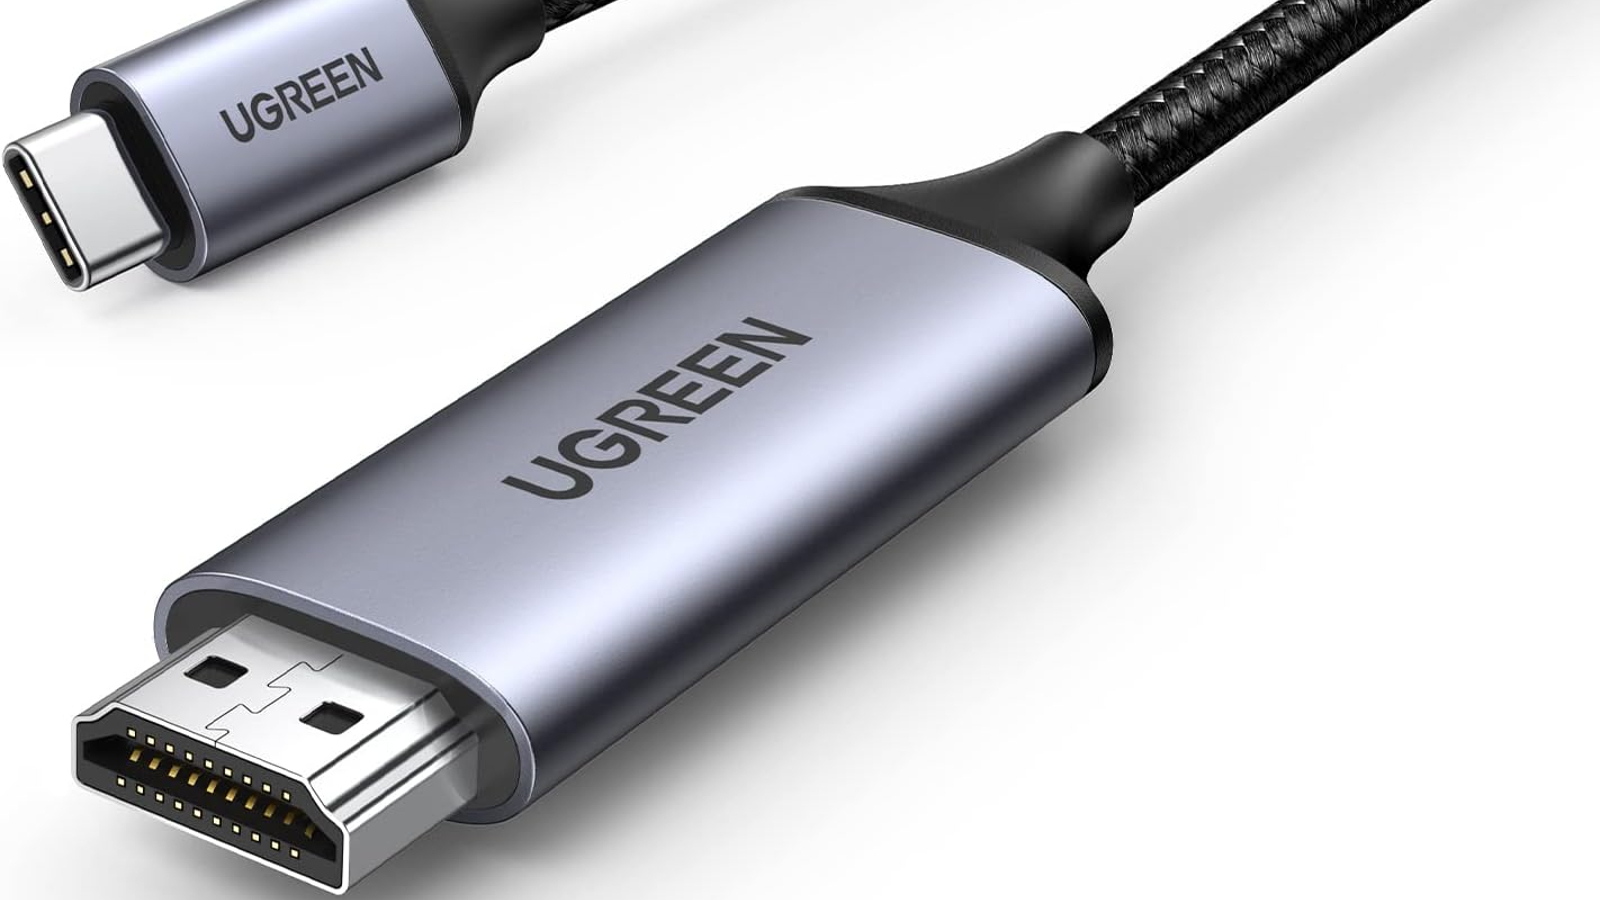 UGreen USB-C to HDMI Cable - Best USB-C to HDMI cable for up to 4K PC monitor connections